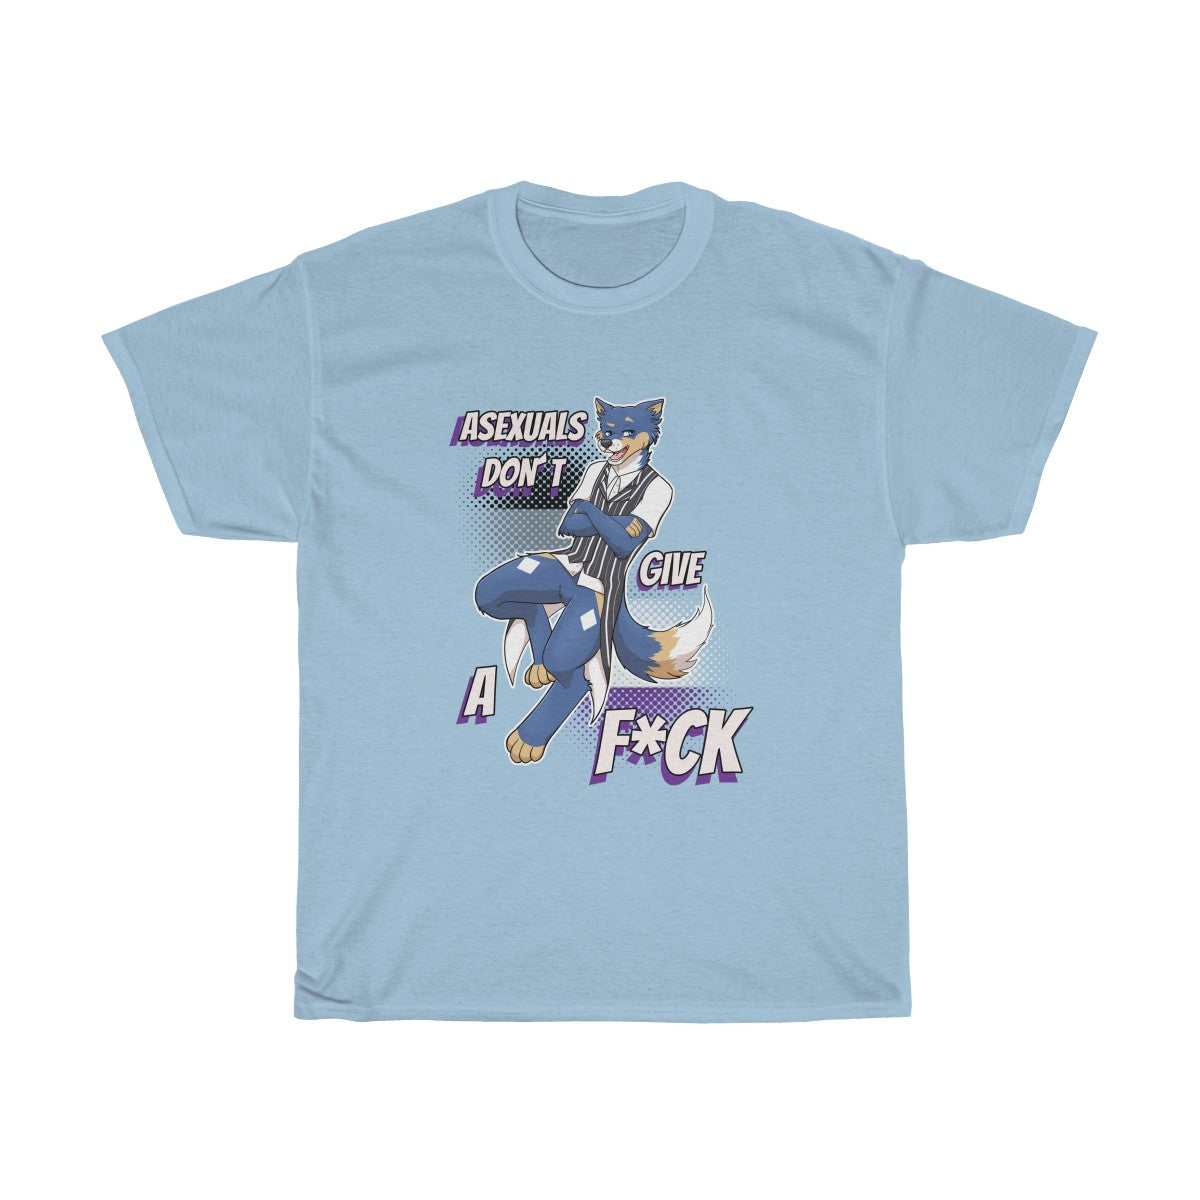 Asexual Don't Give A F*ck - T-Shirt T-Shirt Artemis Wishfoot Light Blue S 